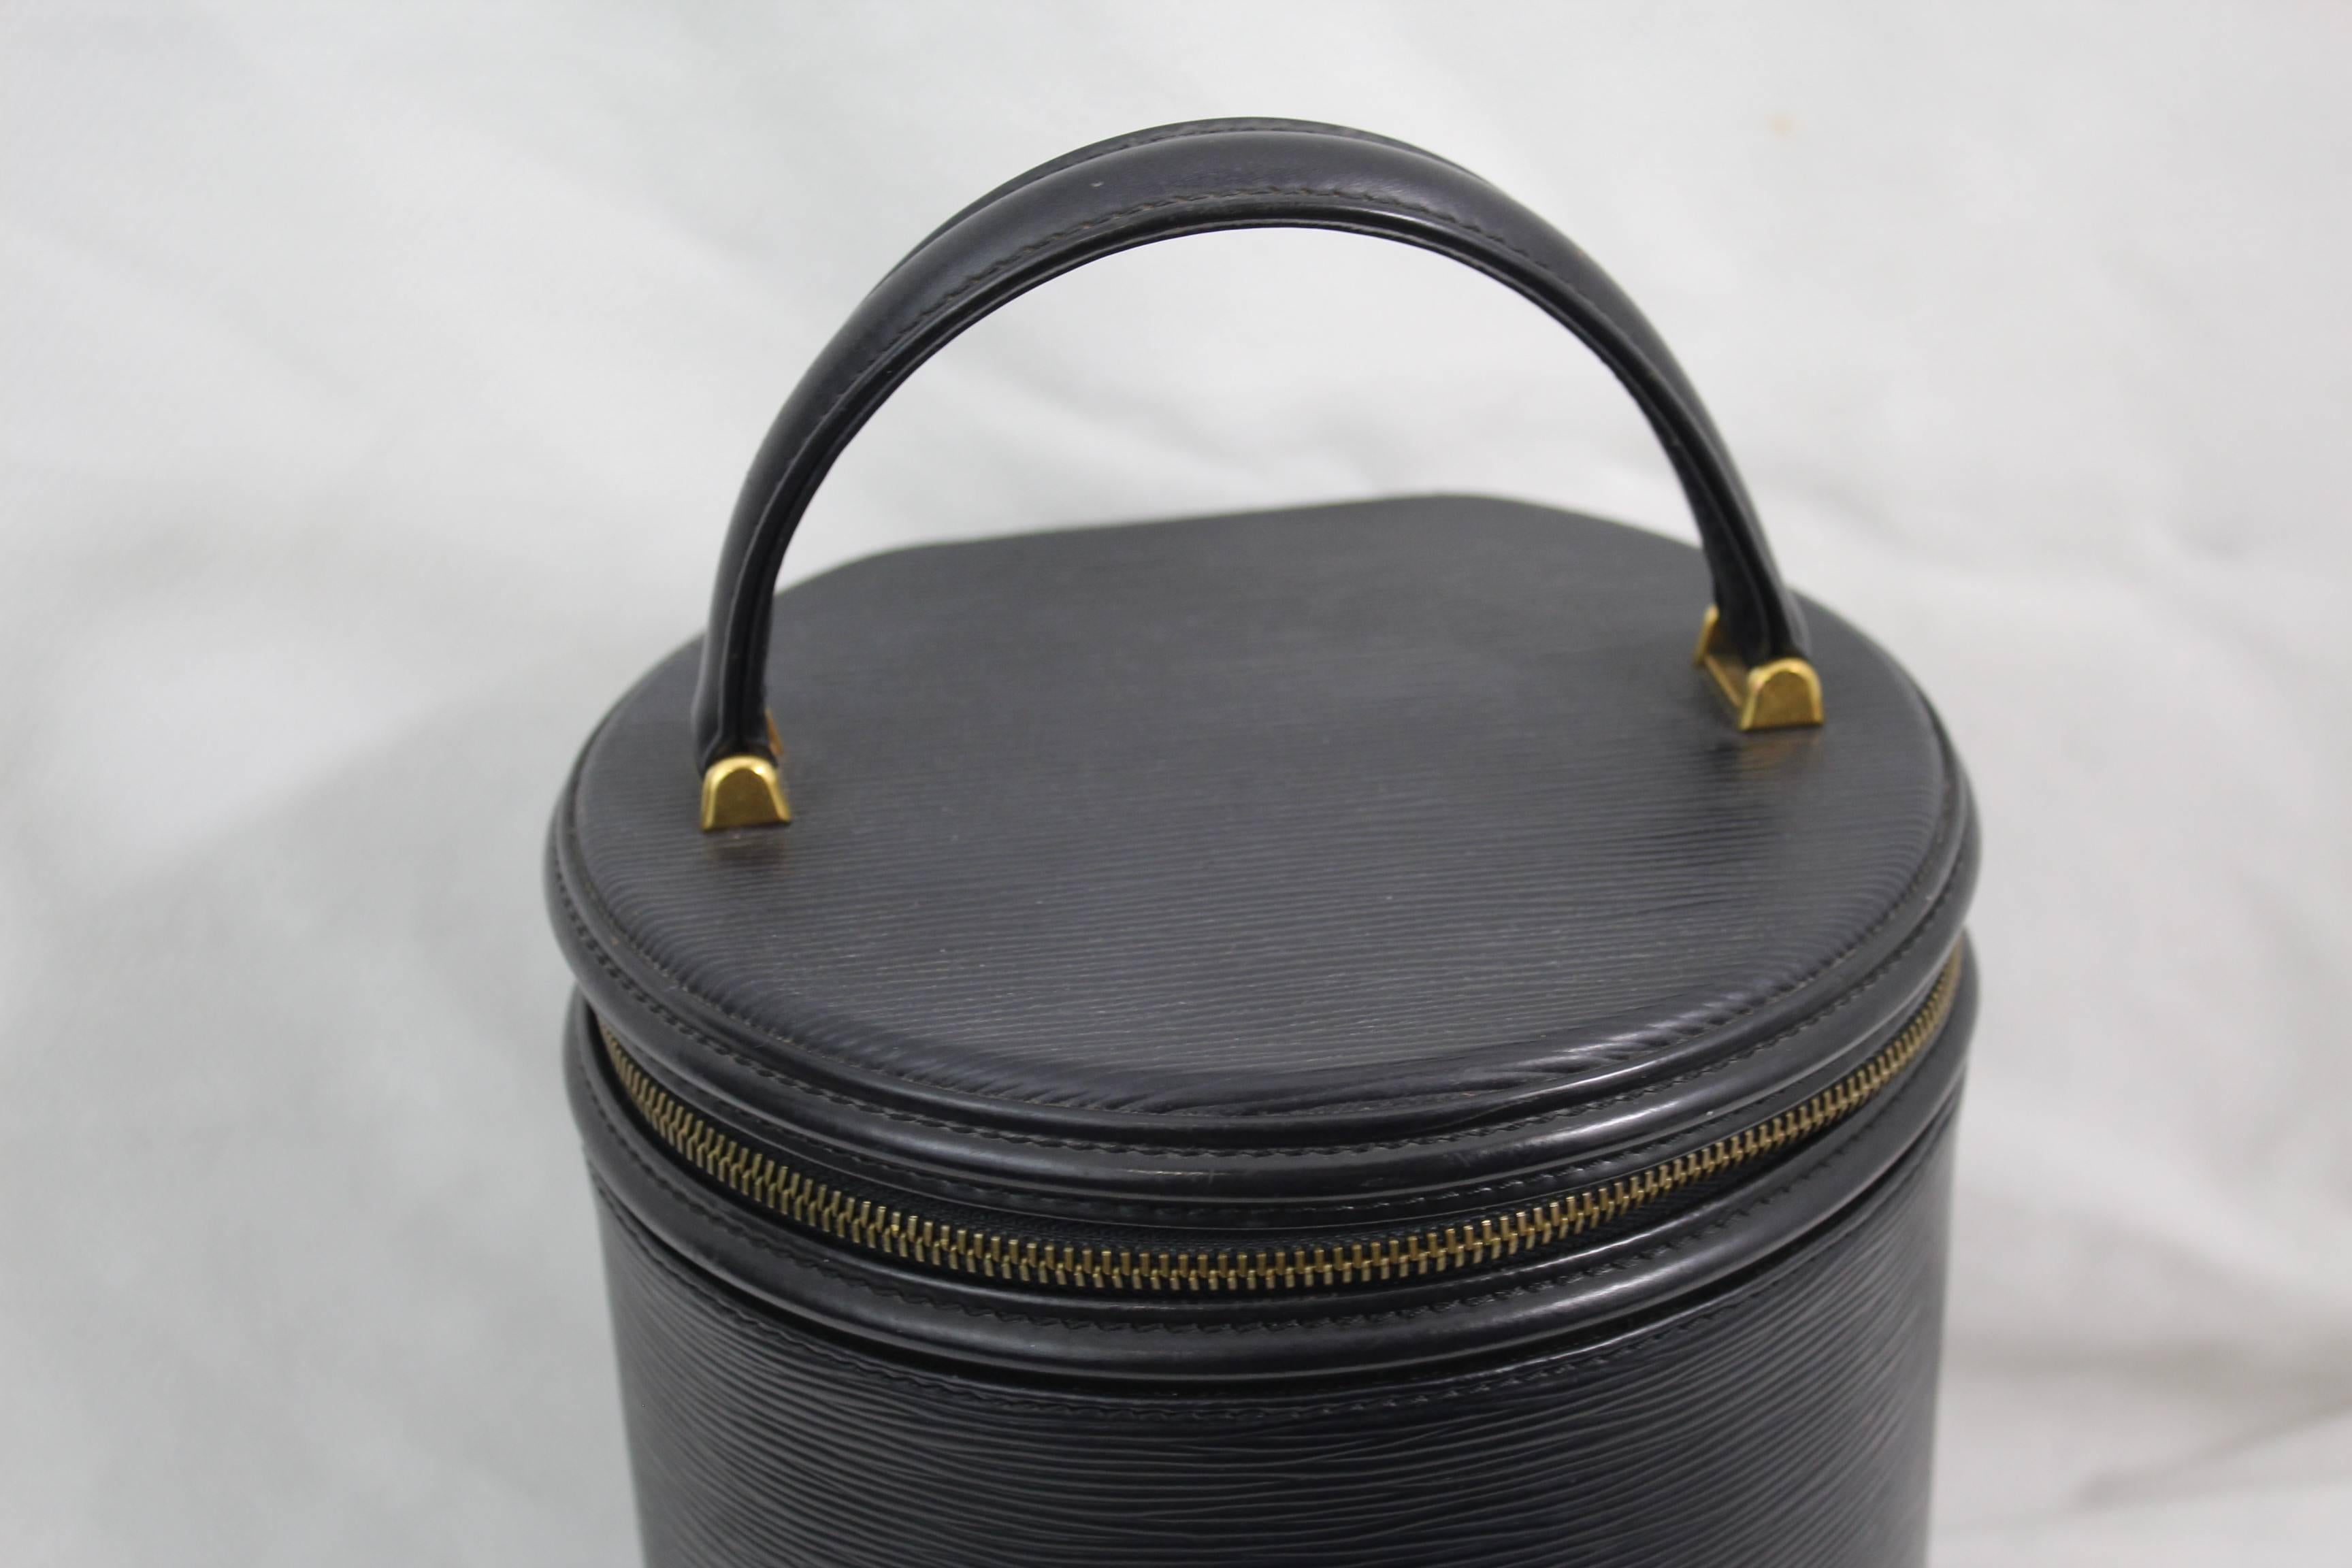 Nice Louis Vuitotn Cannes Vanity case in black epi leather.

good condition but some small signs of use.

Size 20x18 cm